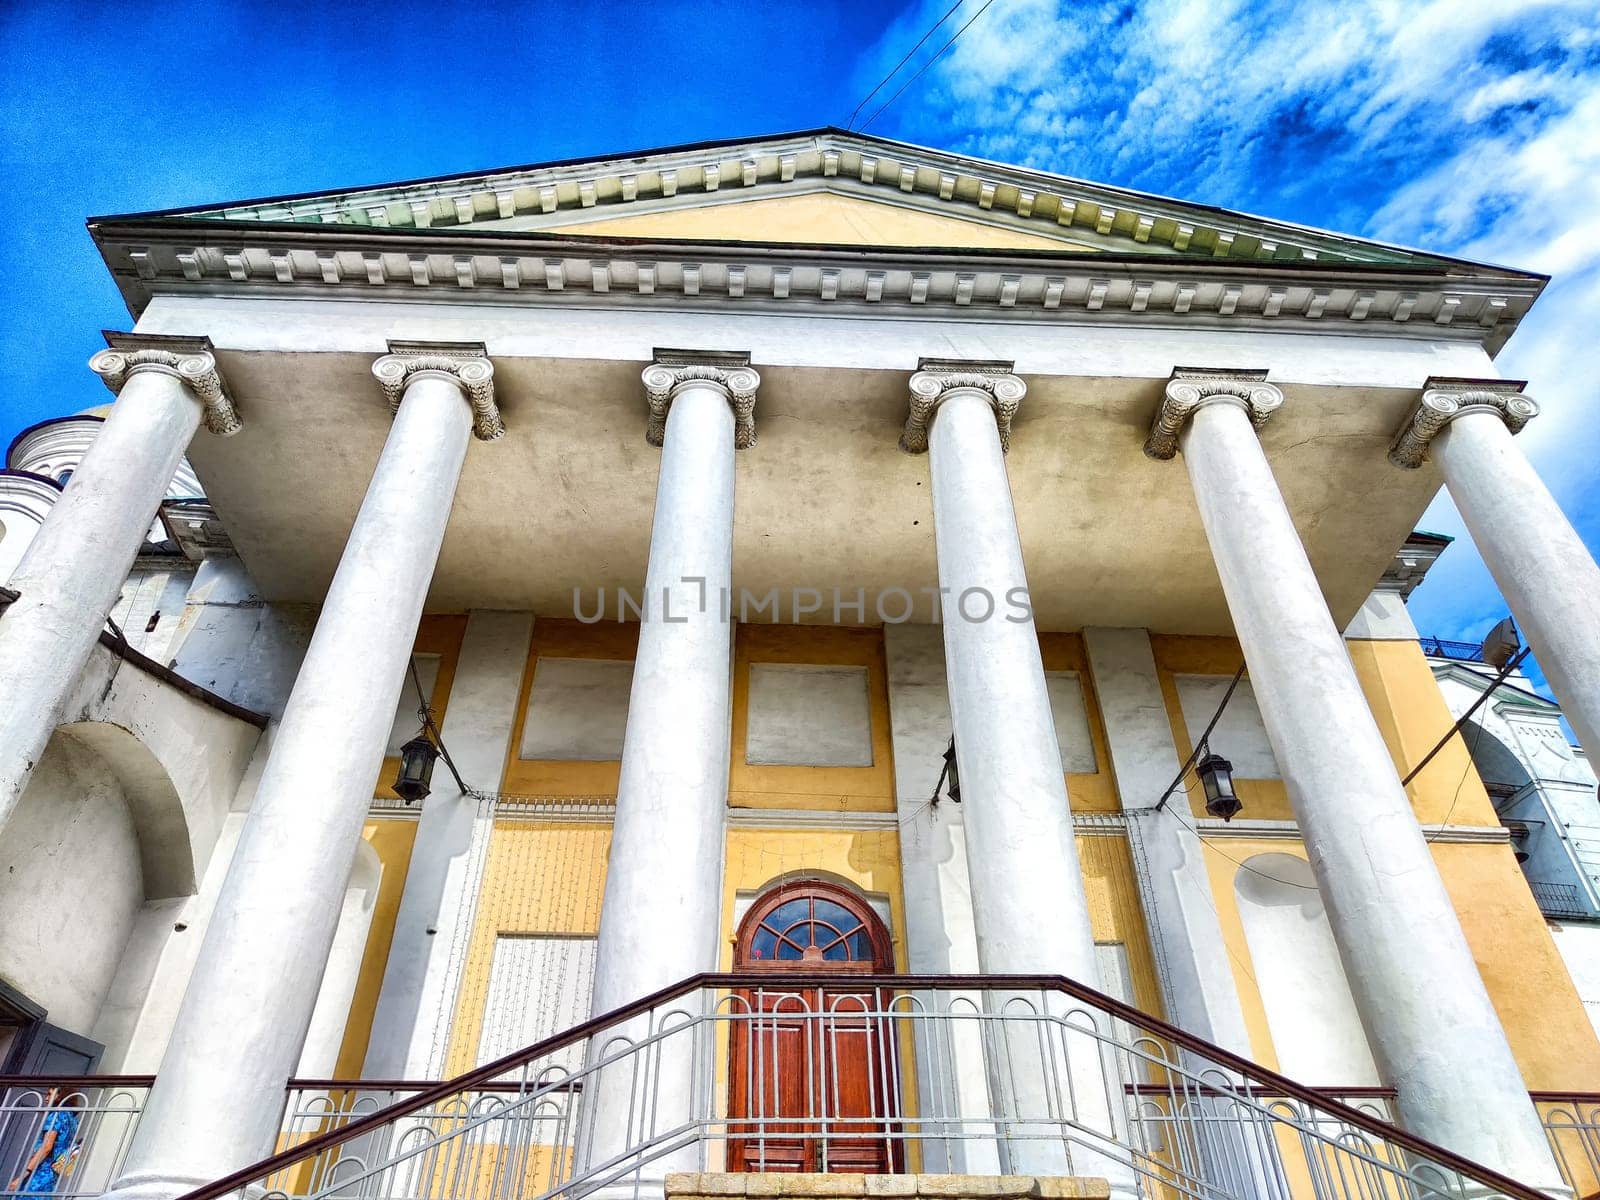 Neoclassical Architecture Under Blue Sky. Stately building with columns and steps against a clear sky